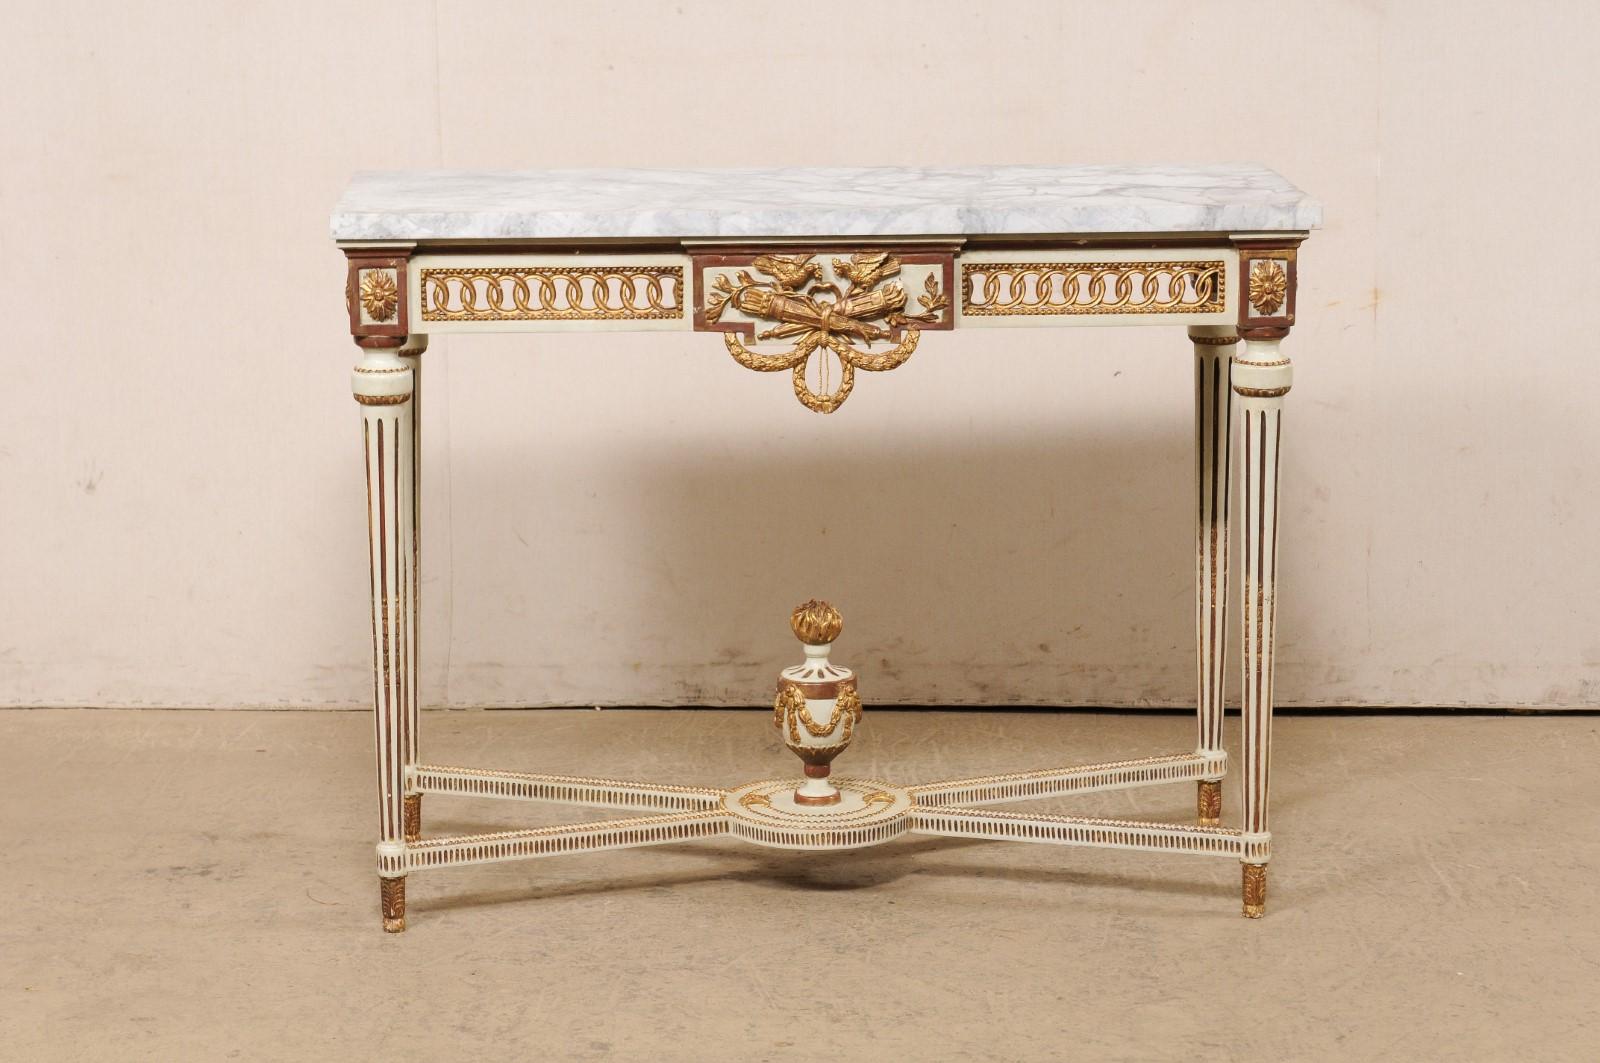 Italian Marble Top Console w/Pierce-Carved Apron & Large Urn Finial at Underside For Sale 7